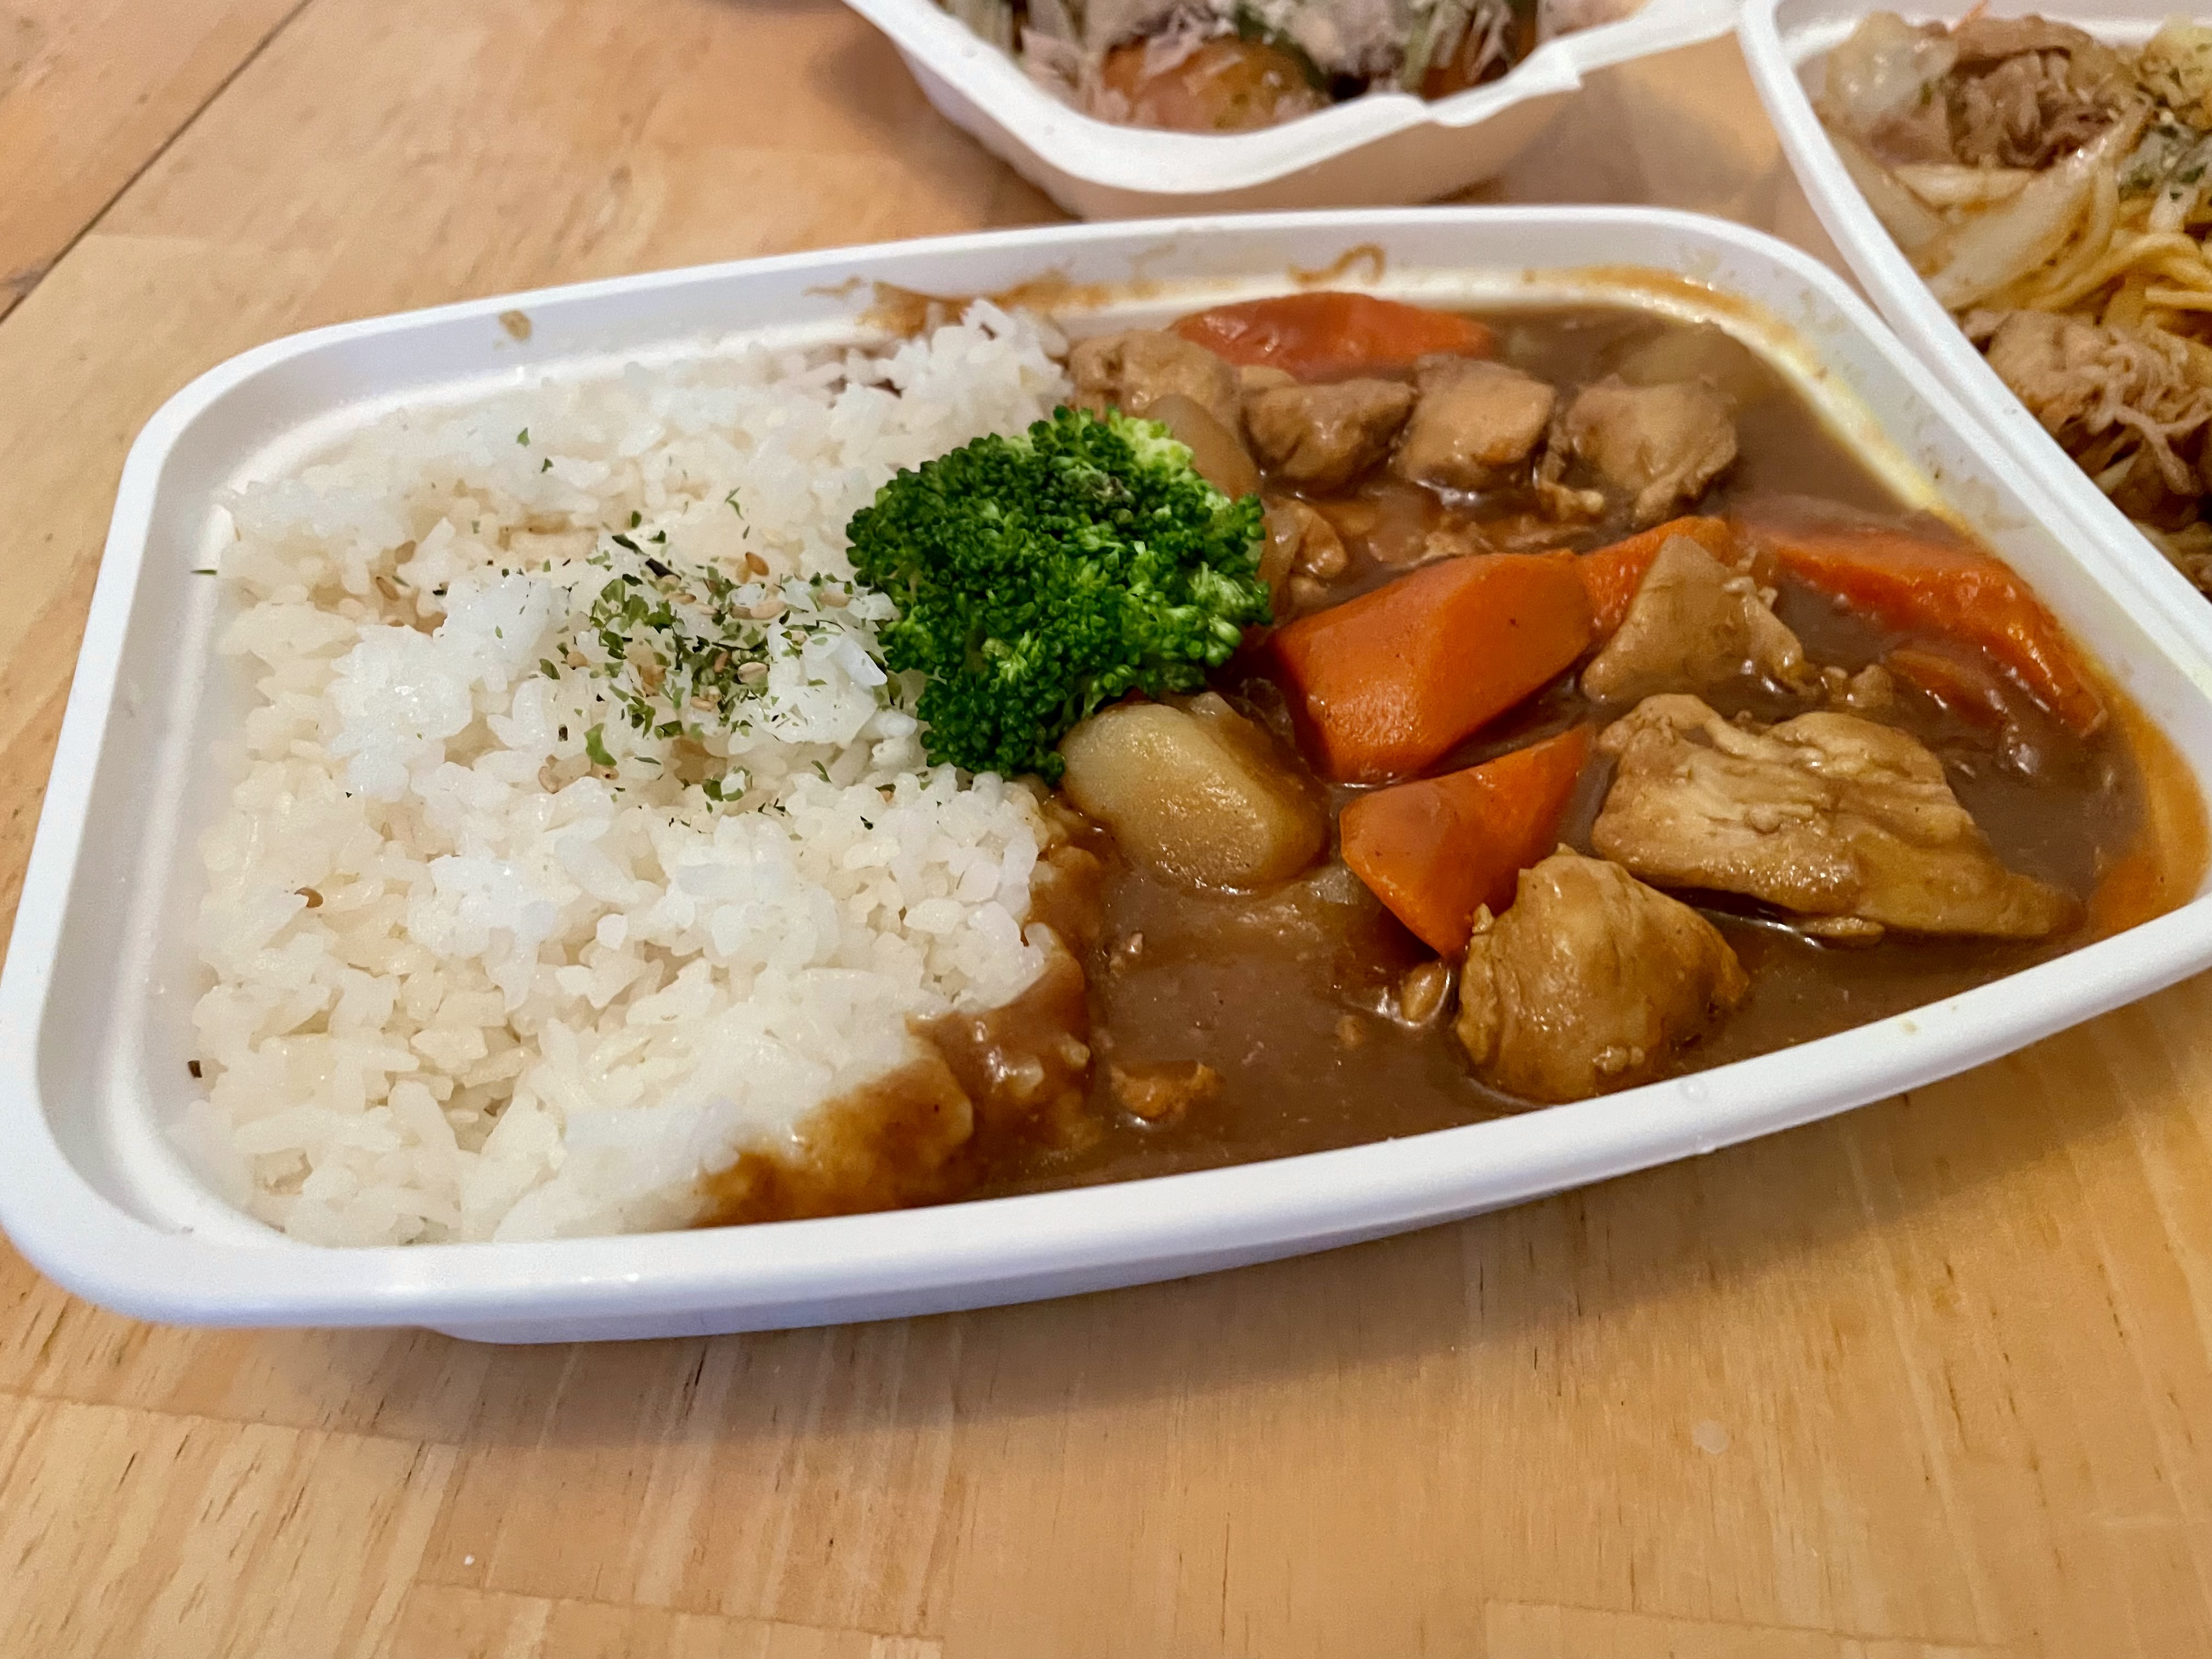 According to Takedon Ottawa, Japanese curry is one of the nation's most popular comfort foods